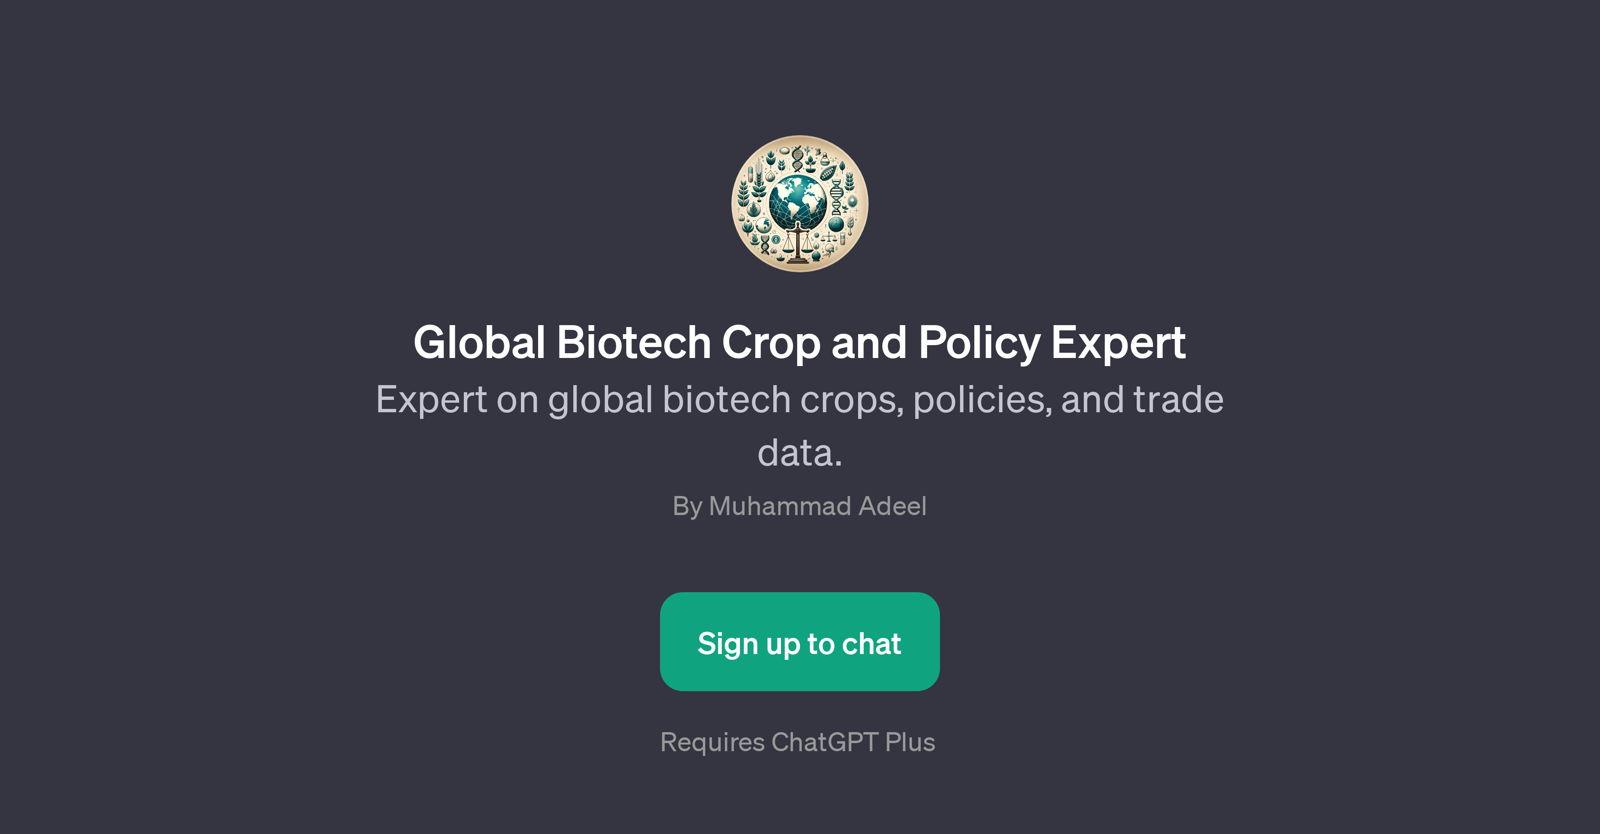 Global Biotech Crop and Policy Expert website